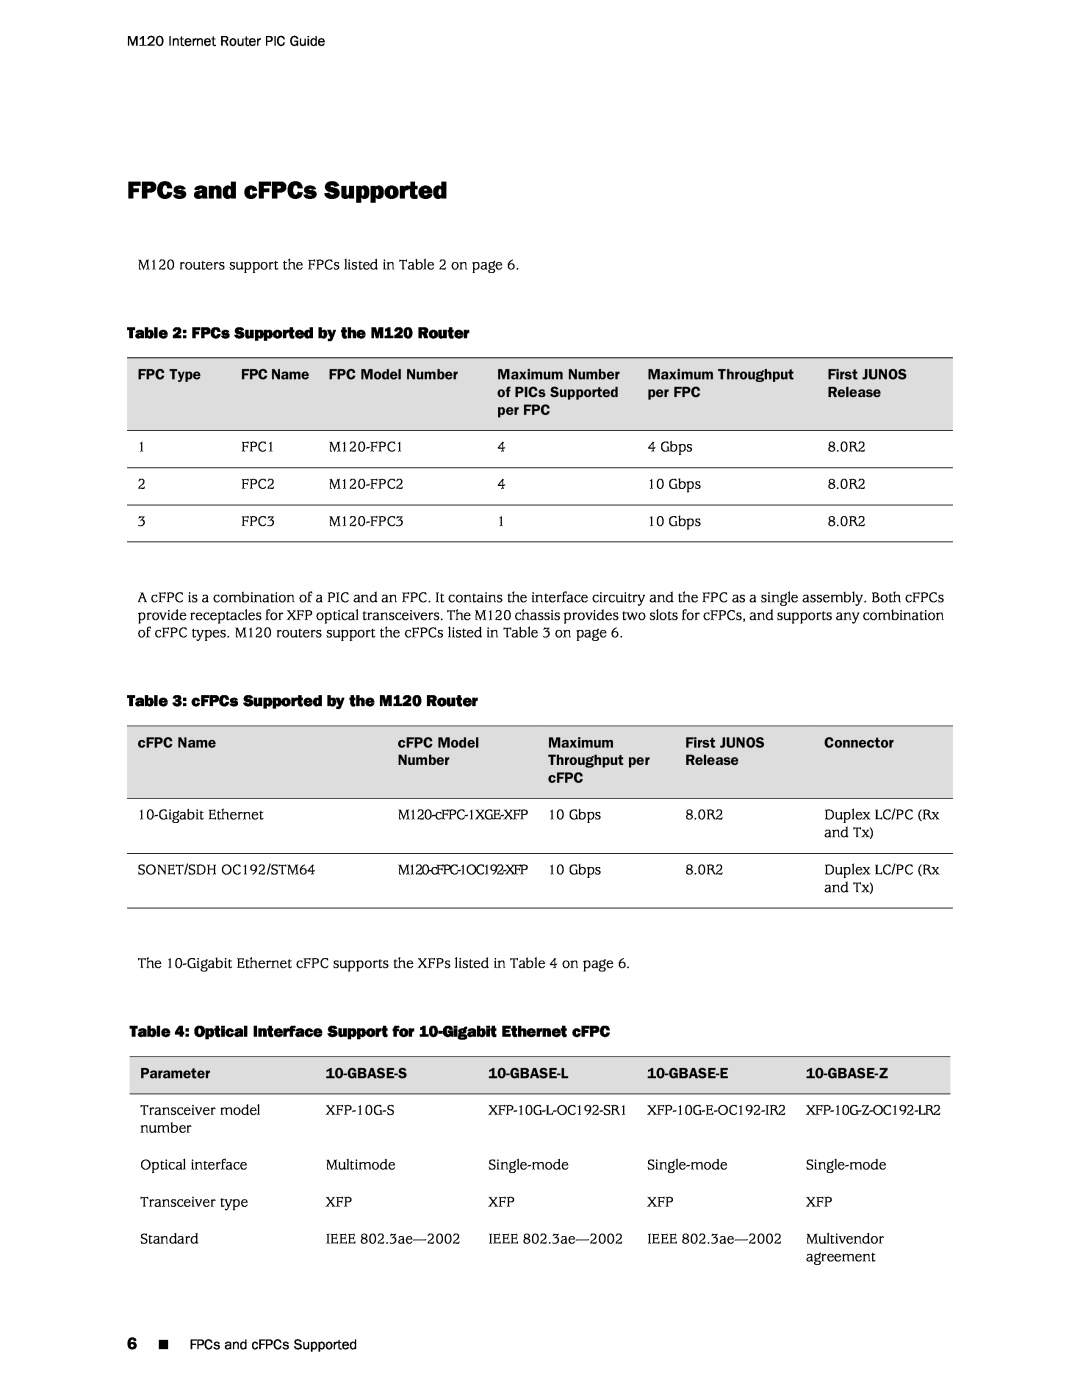 Juniper Networks manual FPCs and cFPCs Supported, cFPCs Supported by the M120 Router 